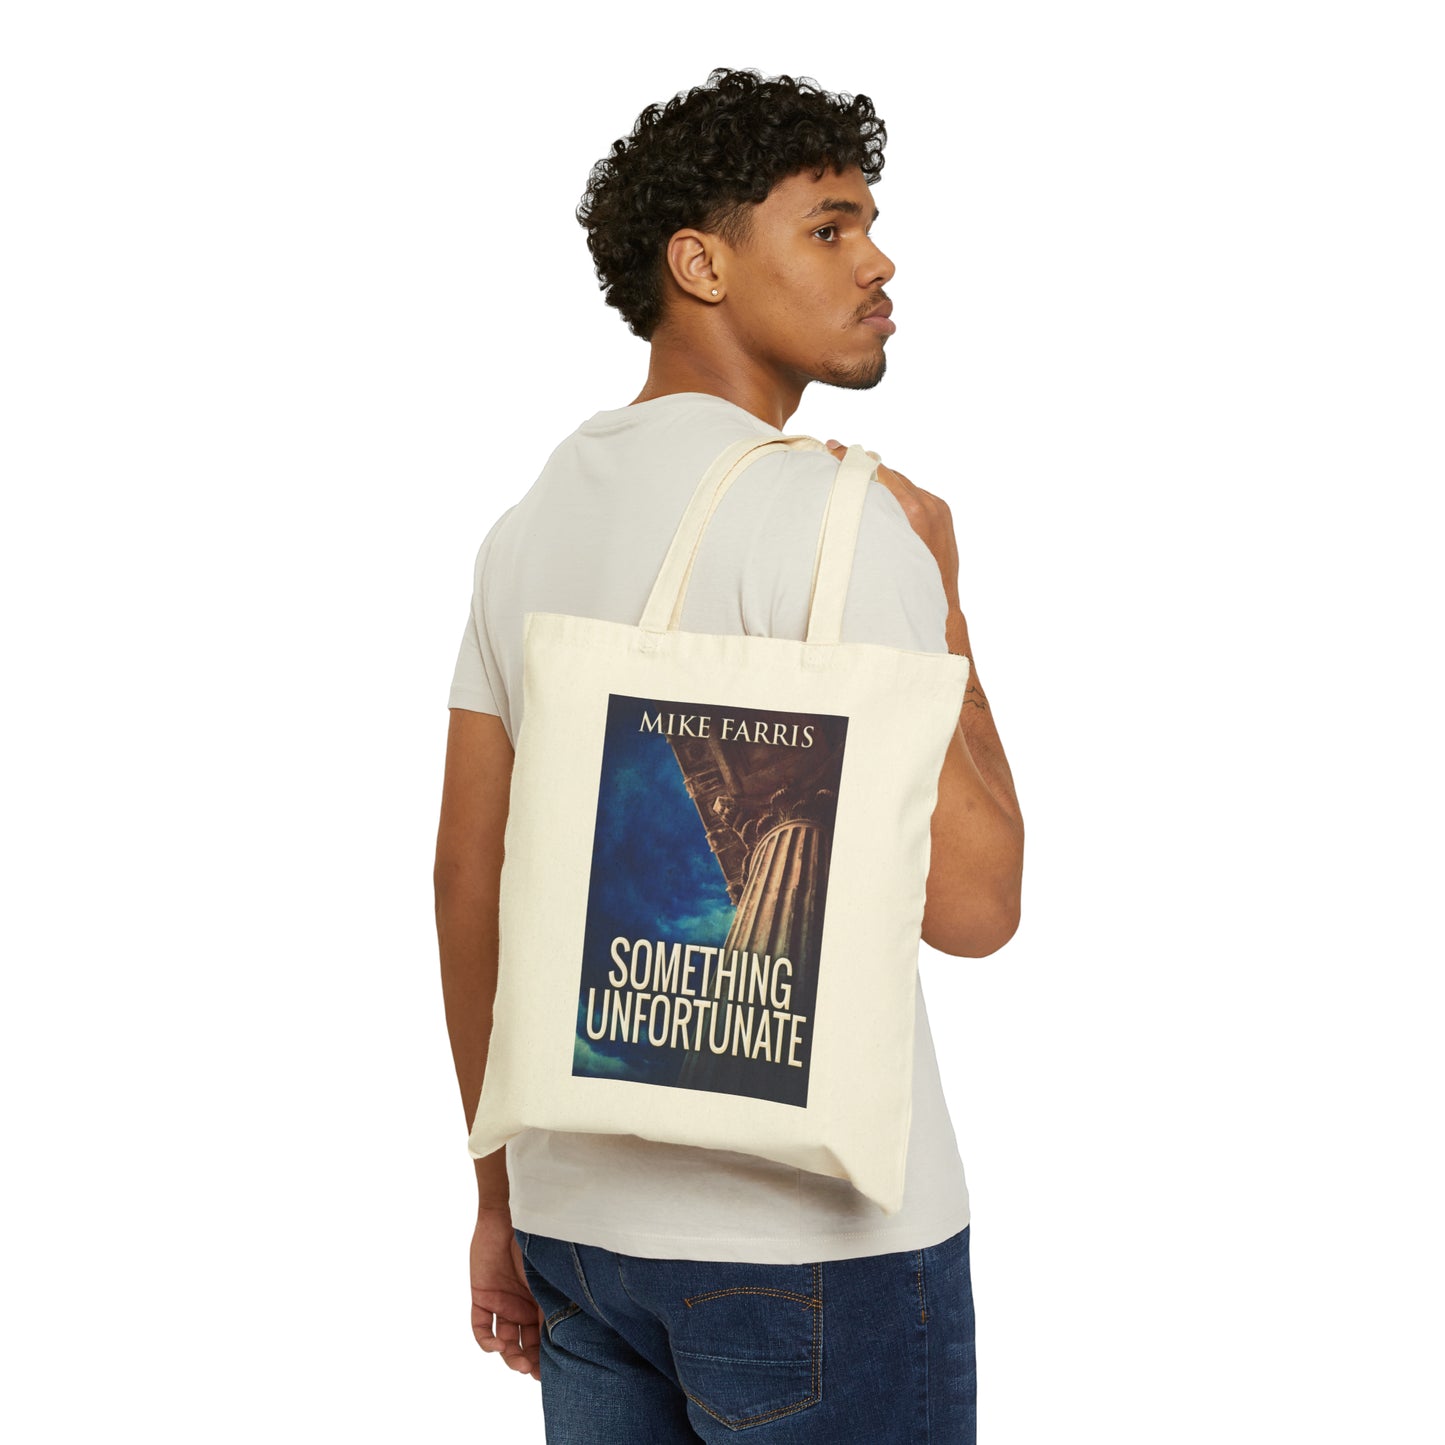 Something Unfortunate - Cotton Canvas Tote Bag